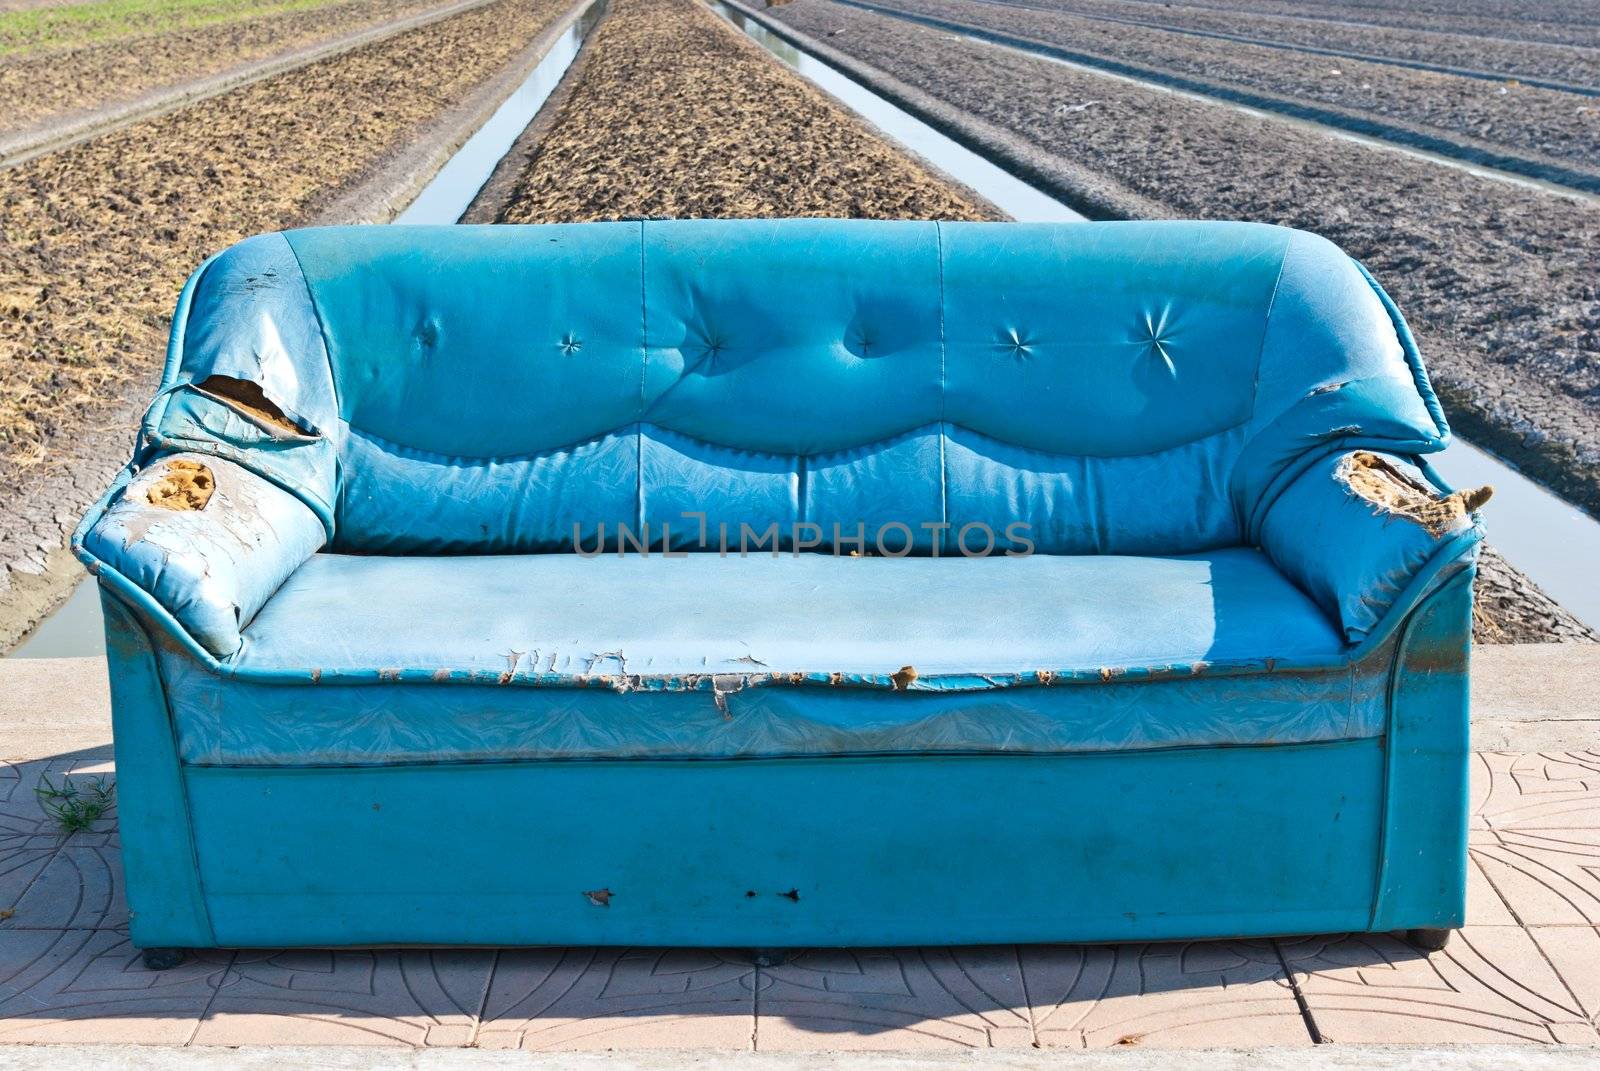 Very old vintage blue sofa on the street, can be use for background and other vintage related concepts.